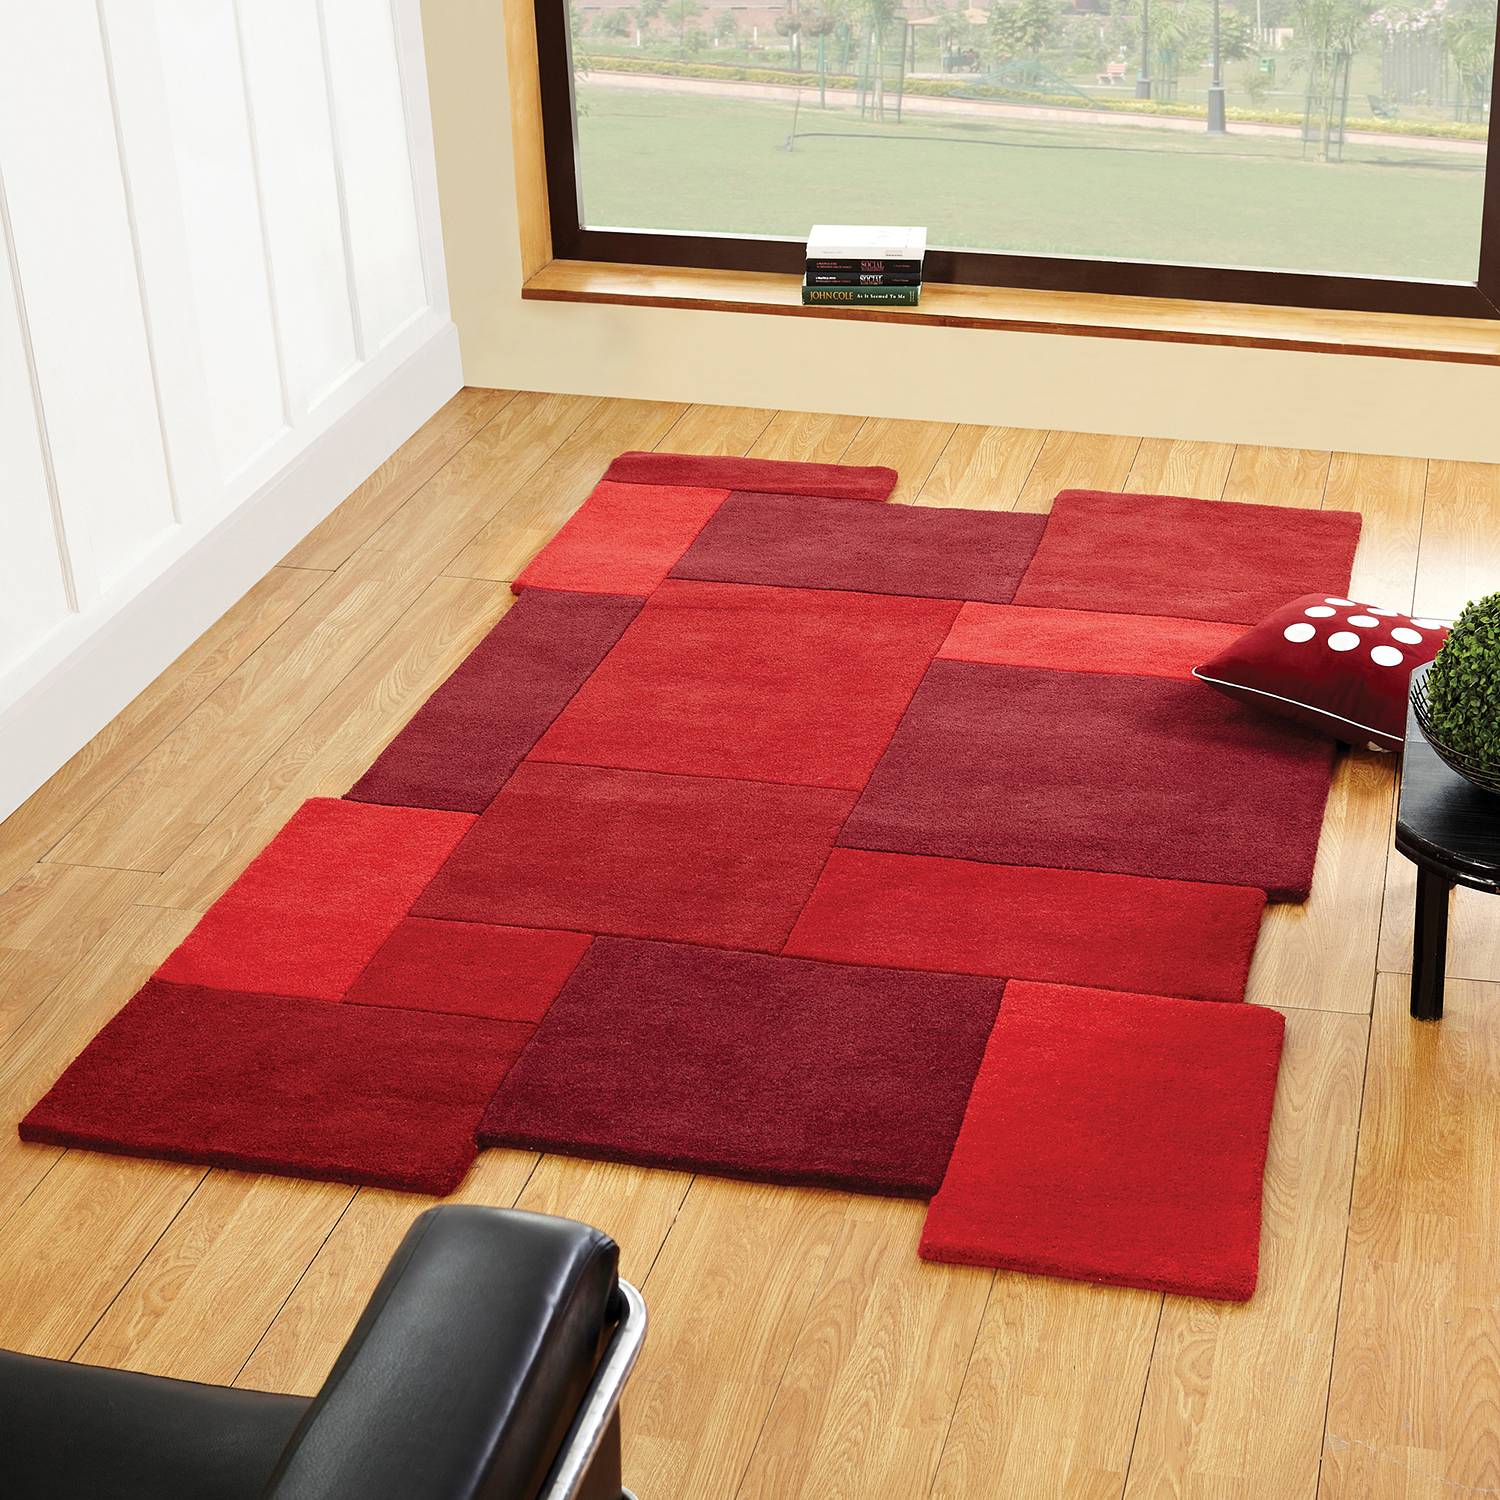 Image of Tapis en laine Collage 000000001000229966